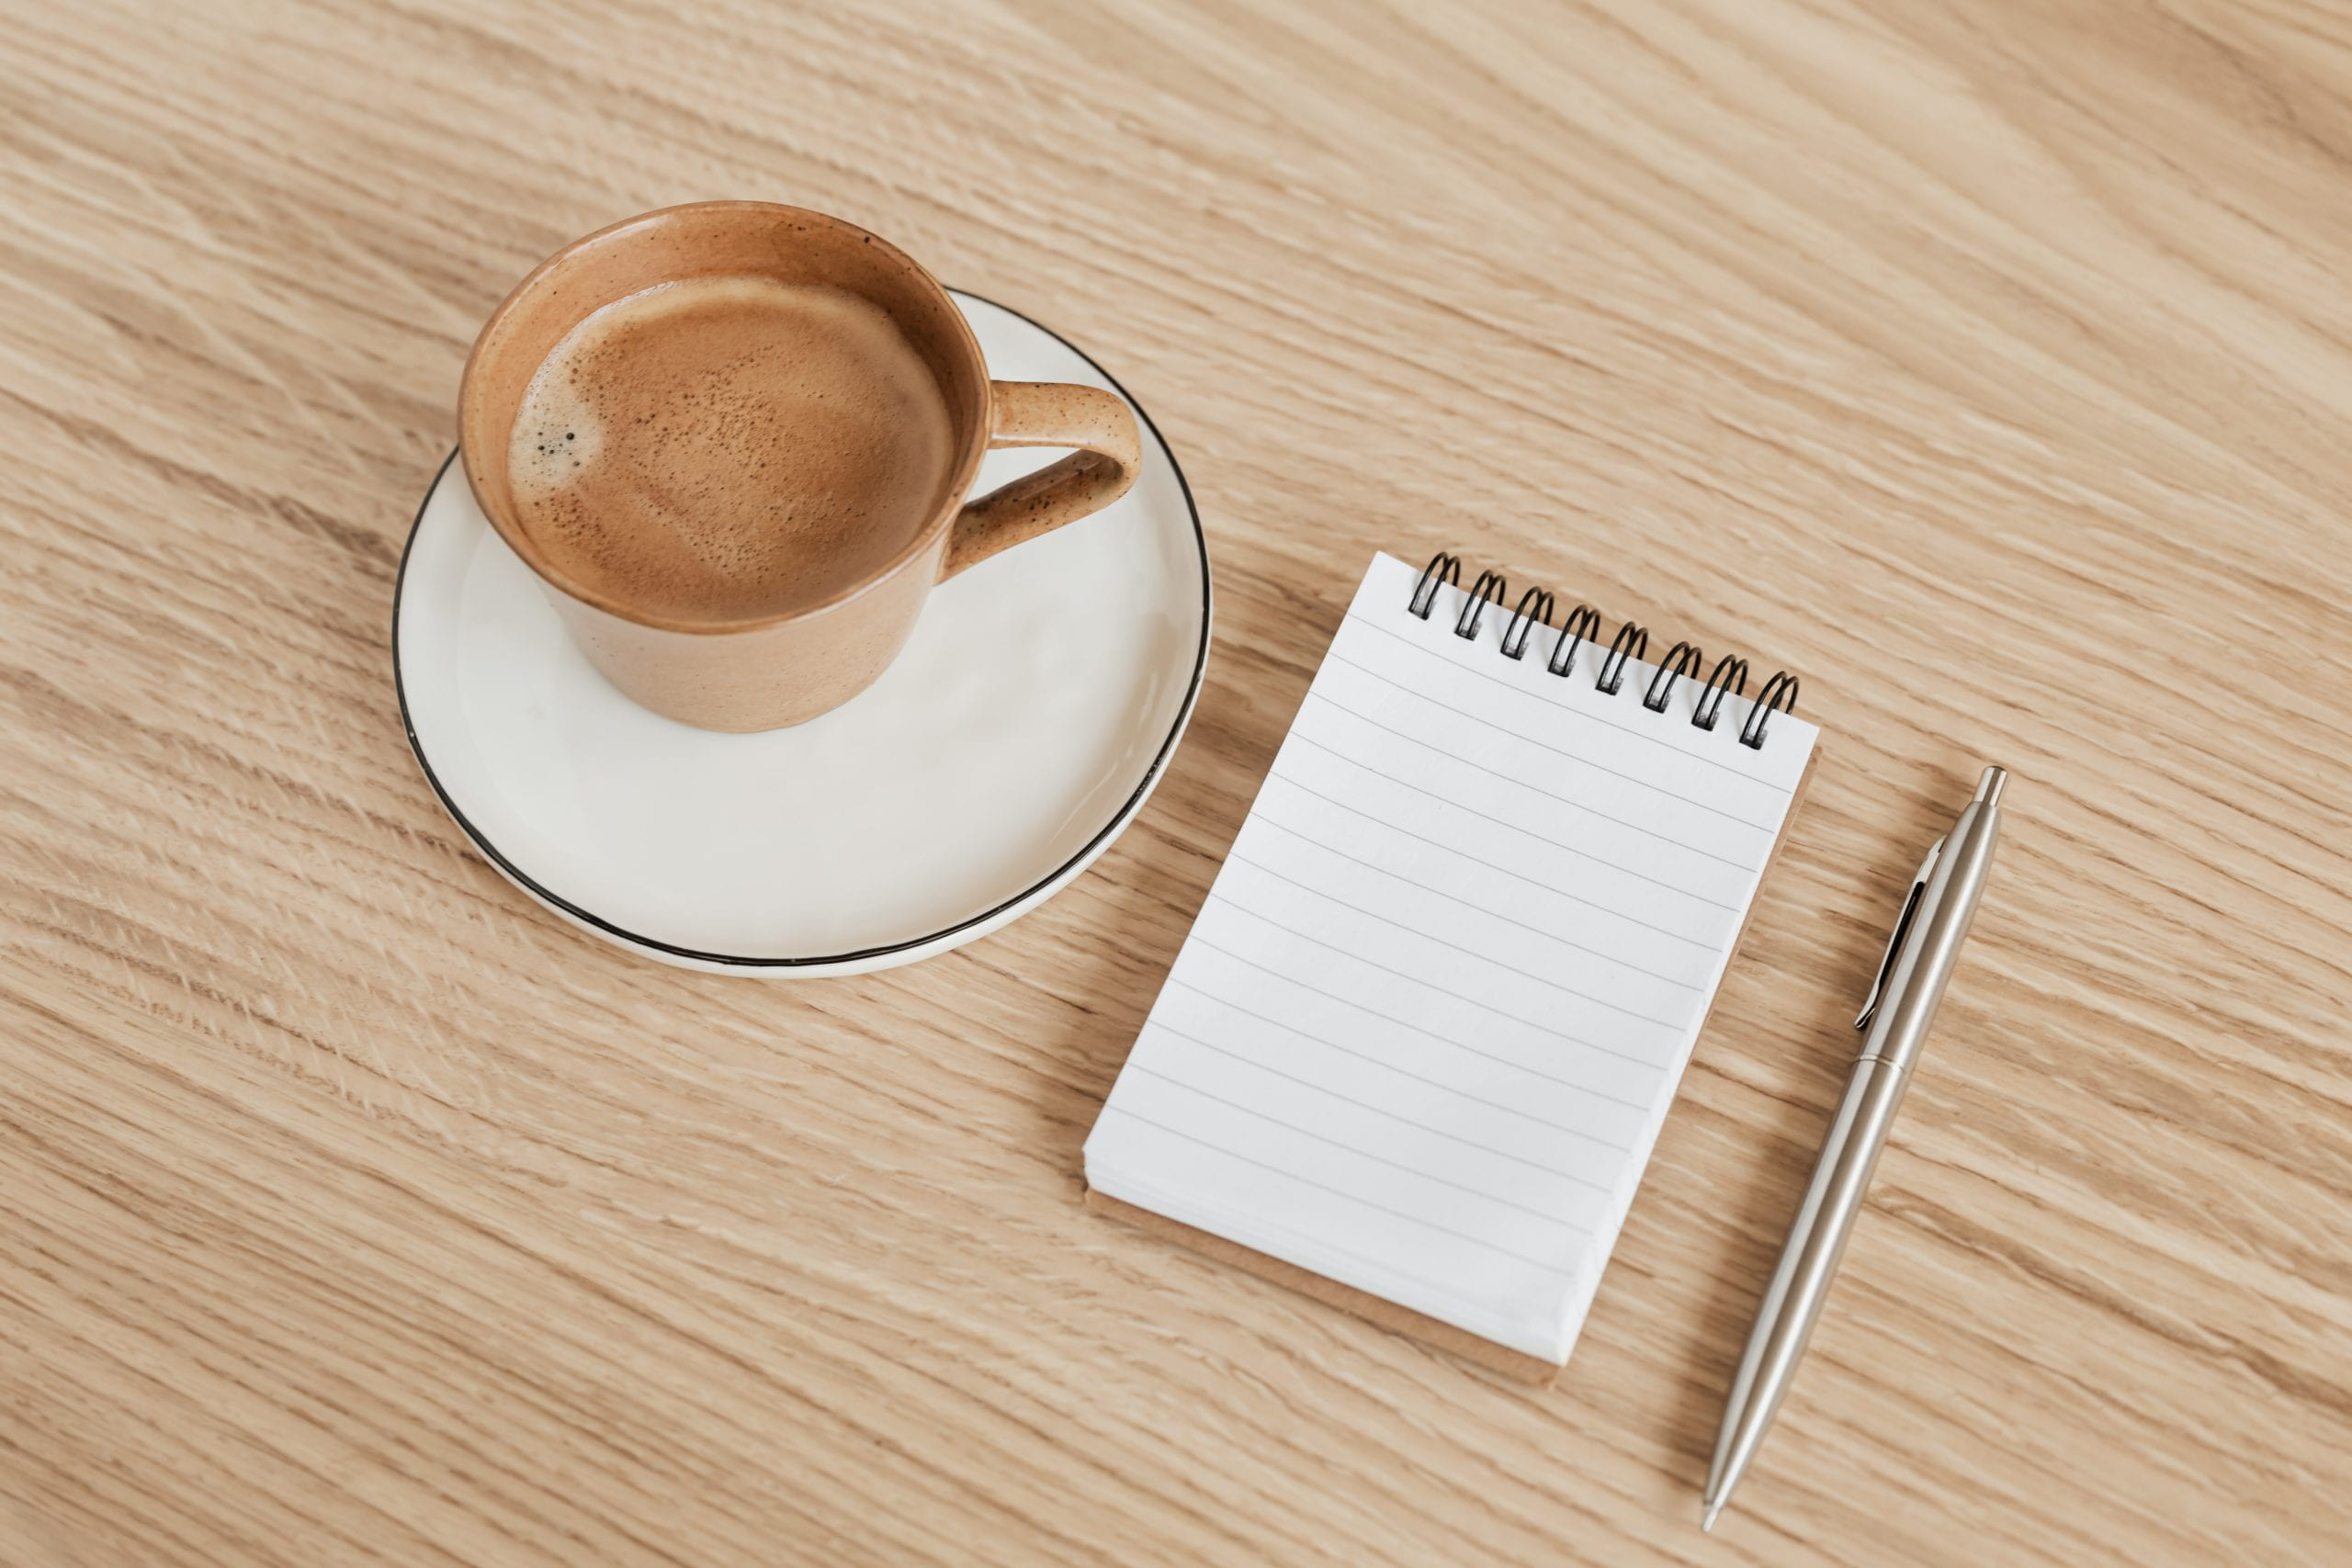 Coffee cup, notepad and pen